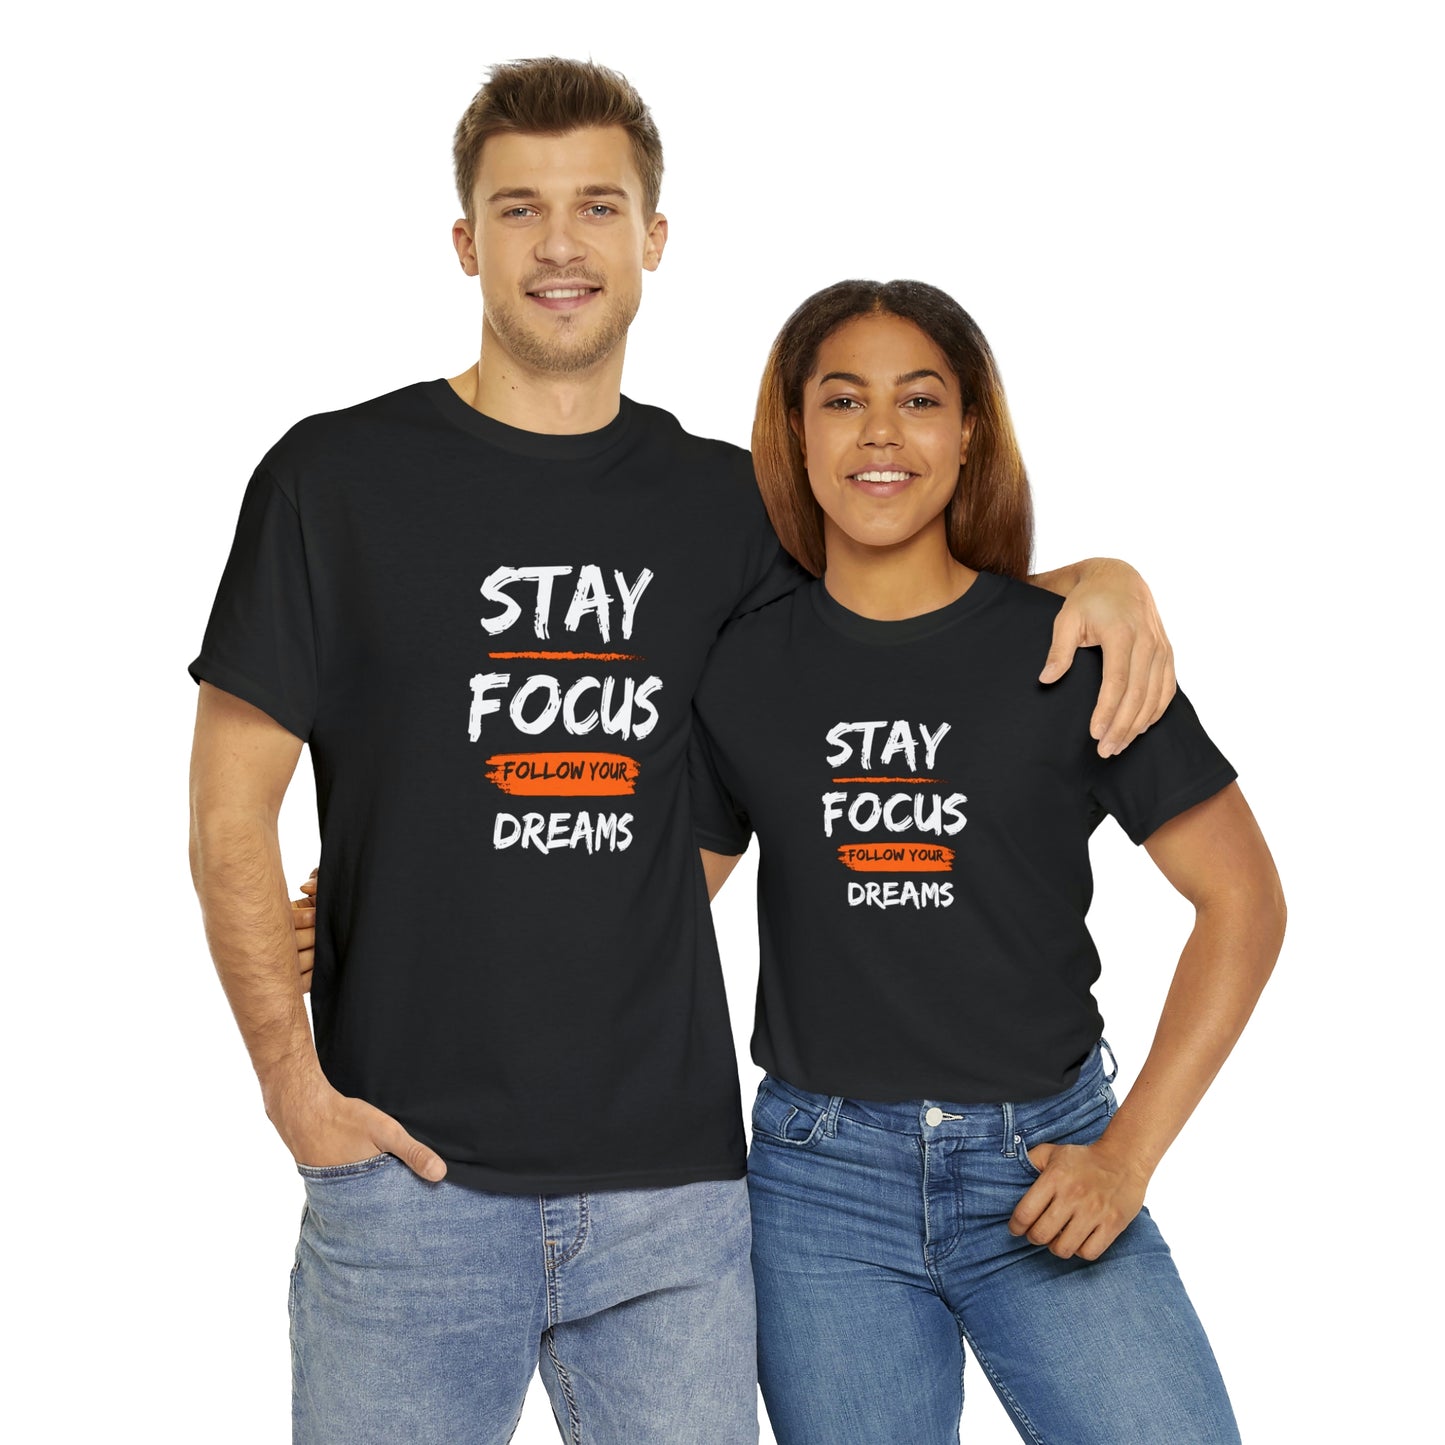 STAY FOCUS FOLLOW YOUR DREAMS T-SHIRT